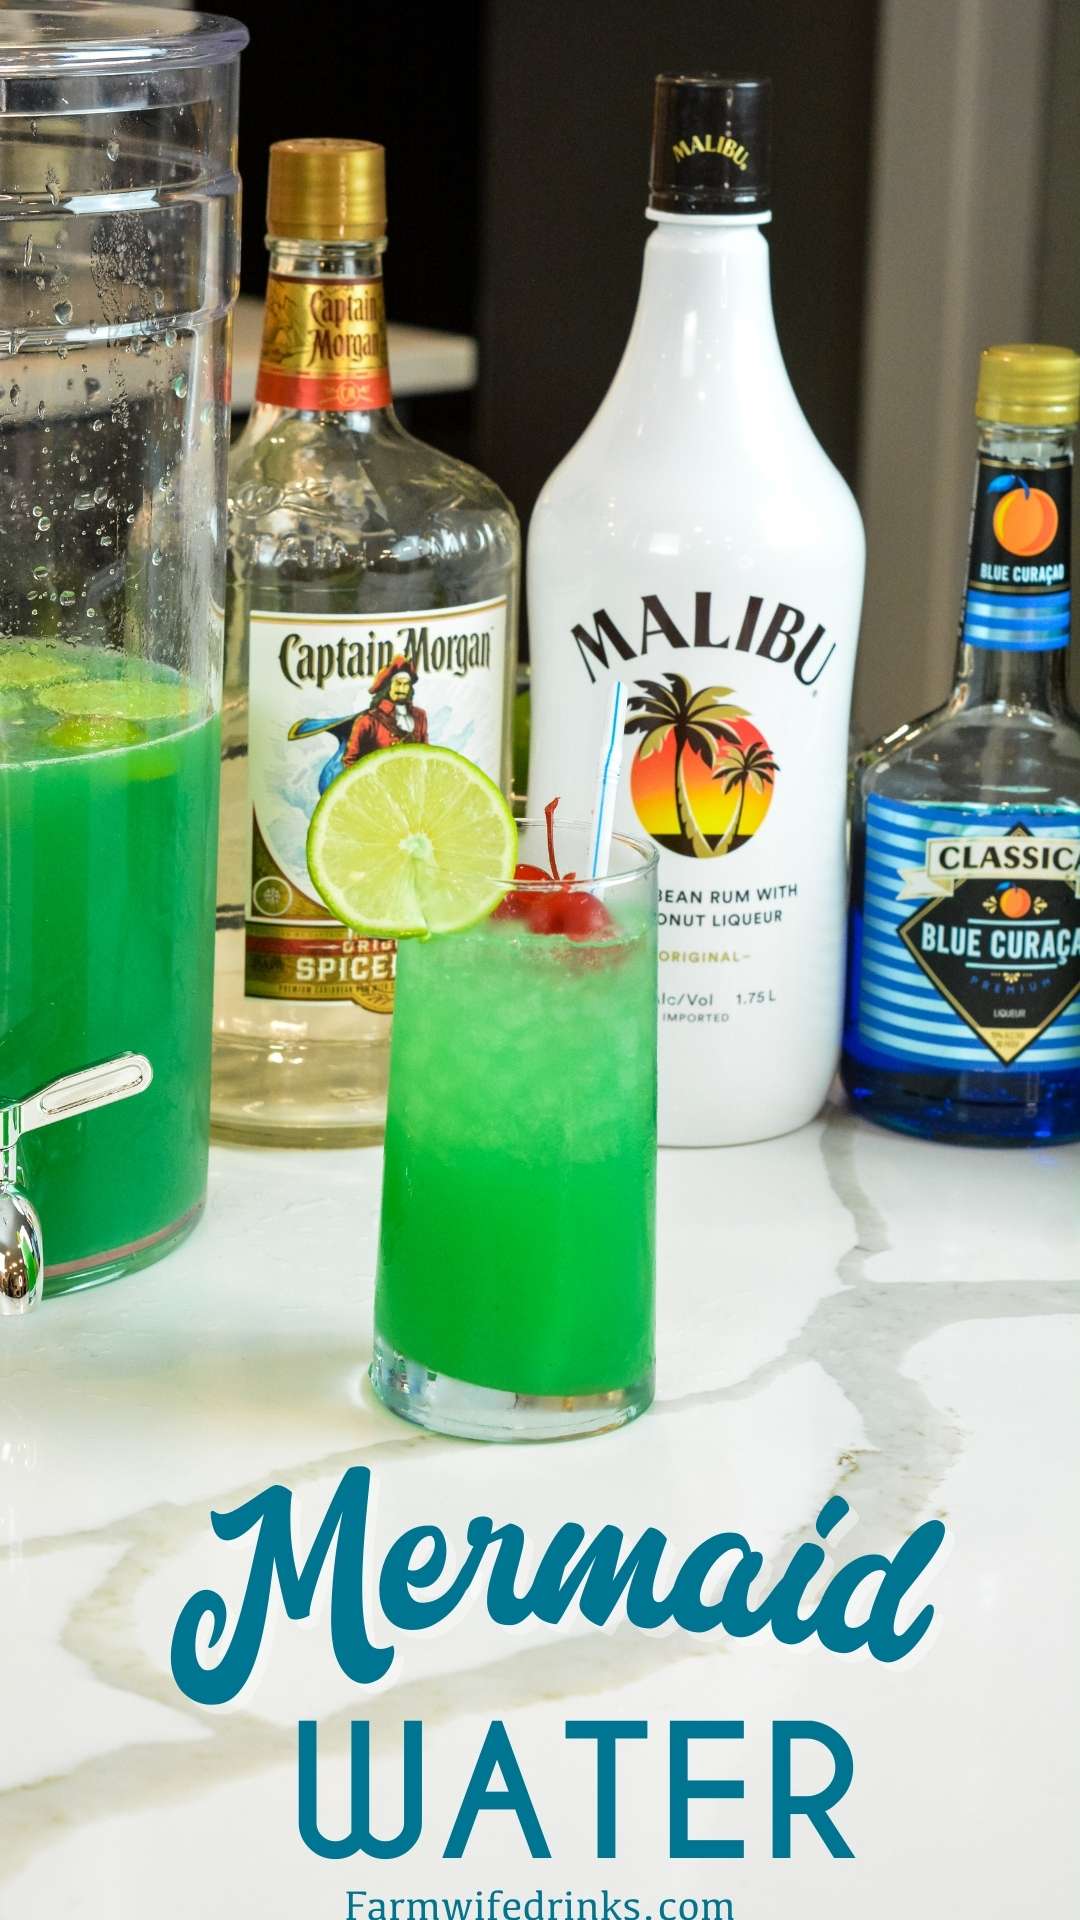 Mermaid water aka boujie fancy swamp water is the perfect spiked punch for summer sipping with the combination of limeade, pineapple juice, Captain Morgan, Malibu, and blue curacao.